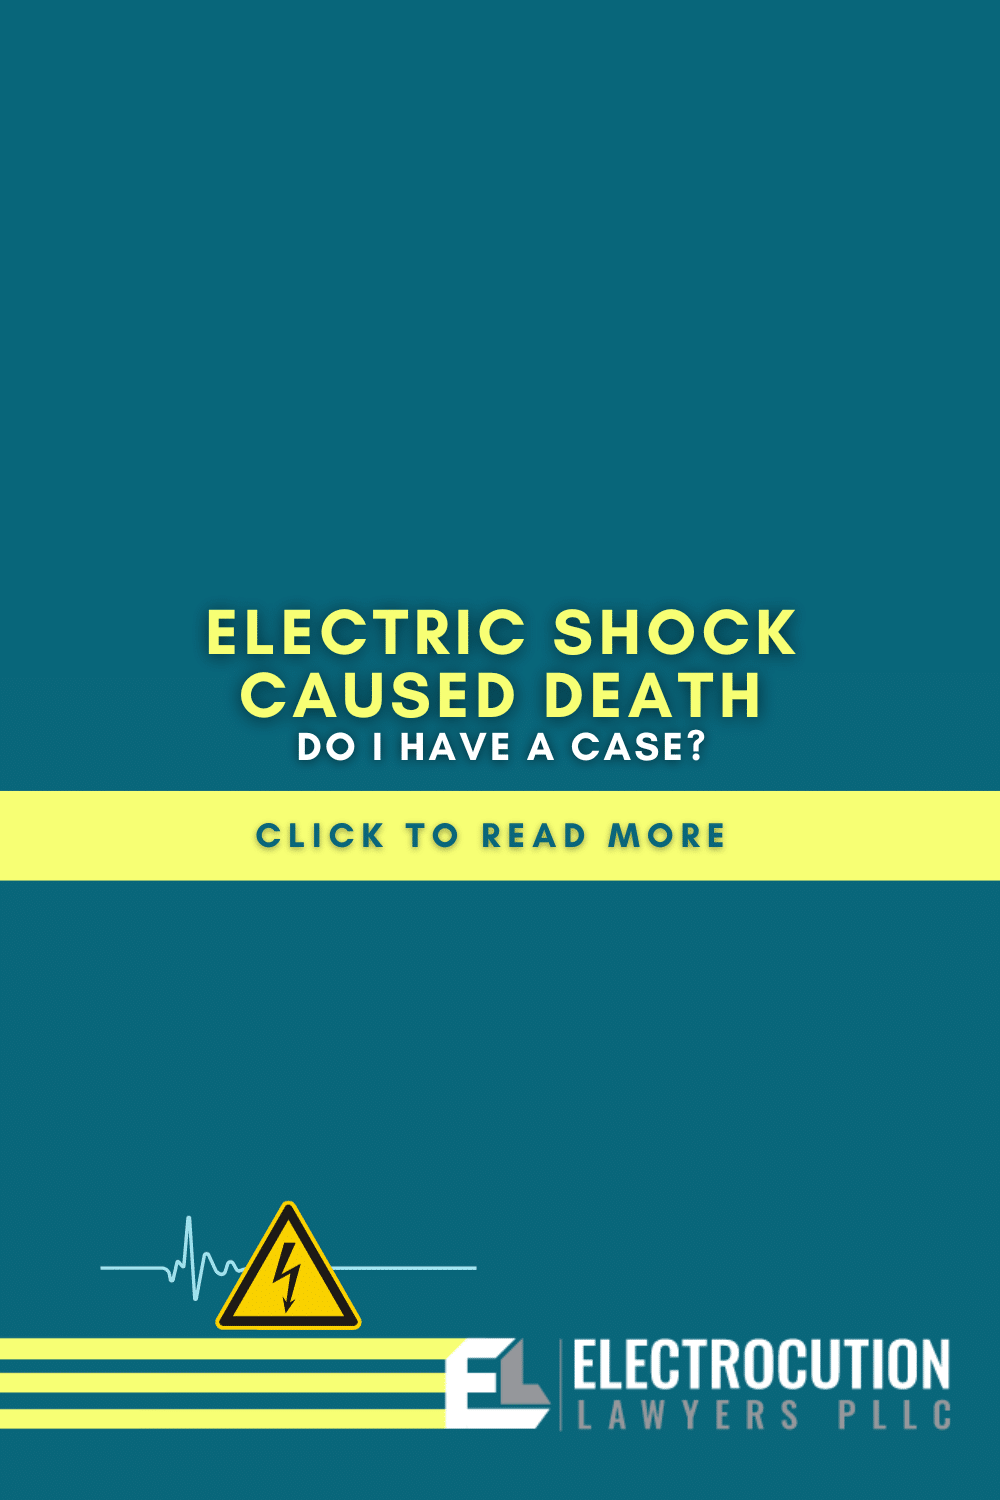 Electric Shock Compensation Claim: What You Need To Know